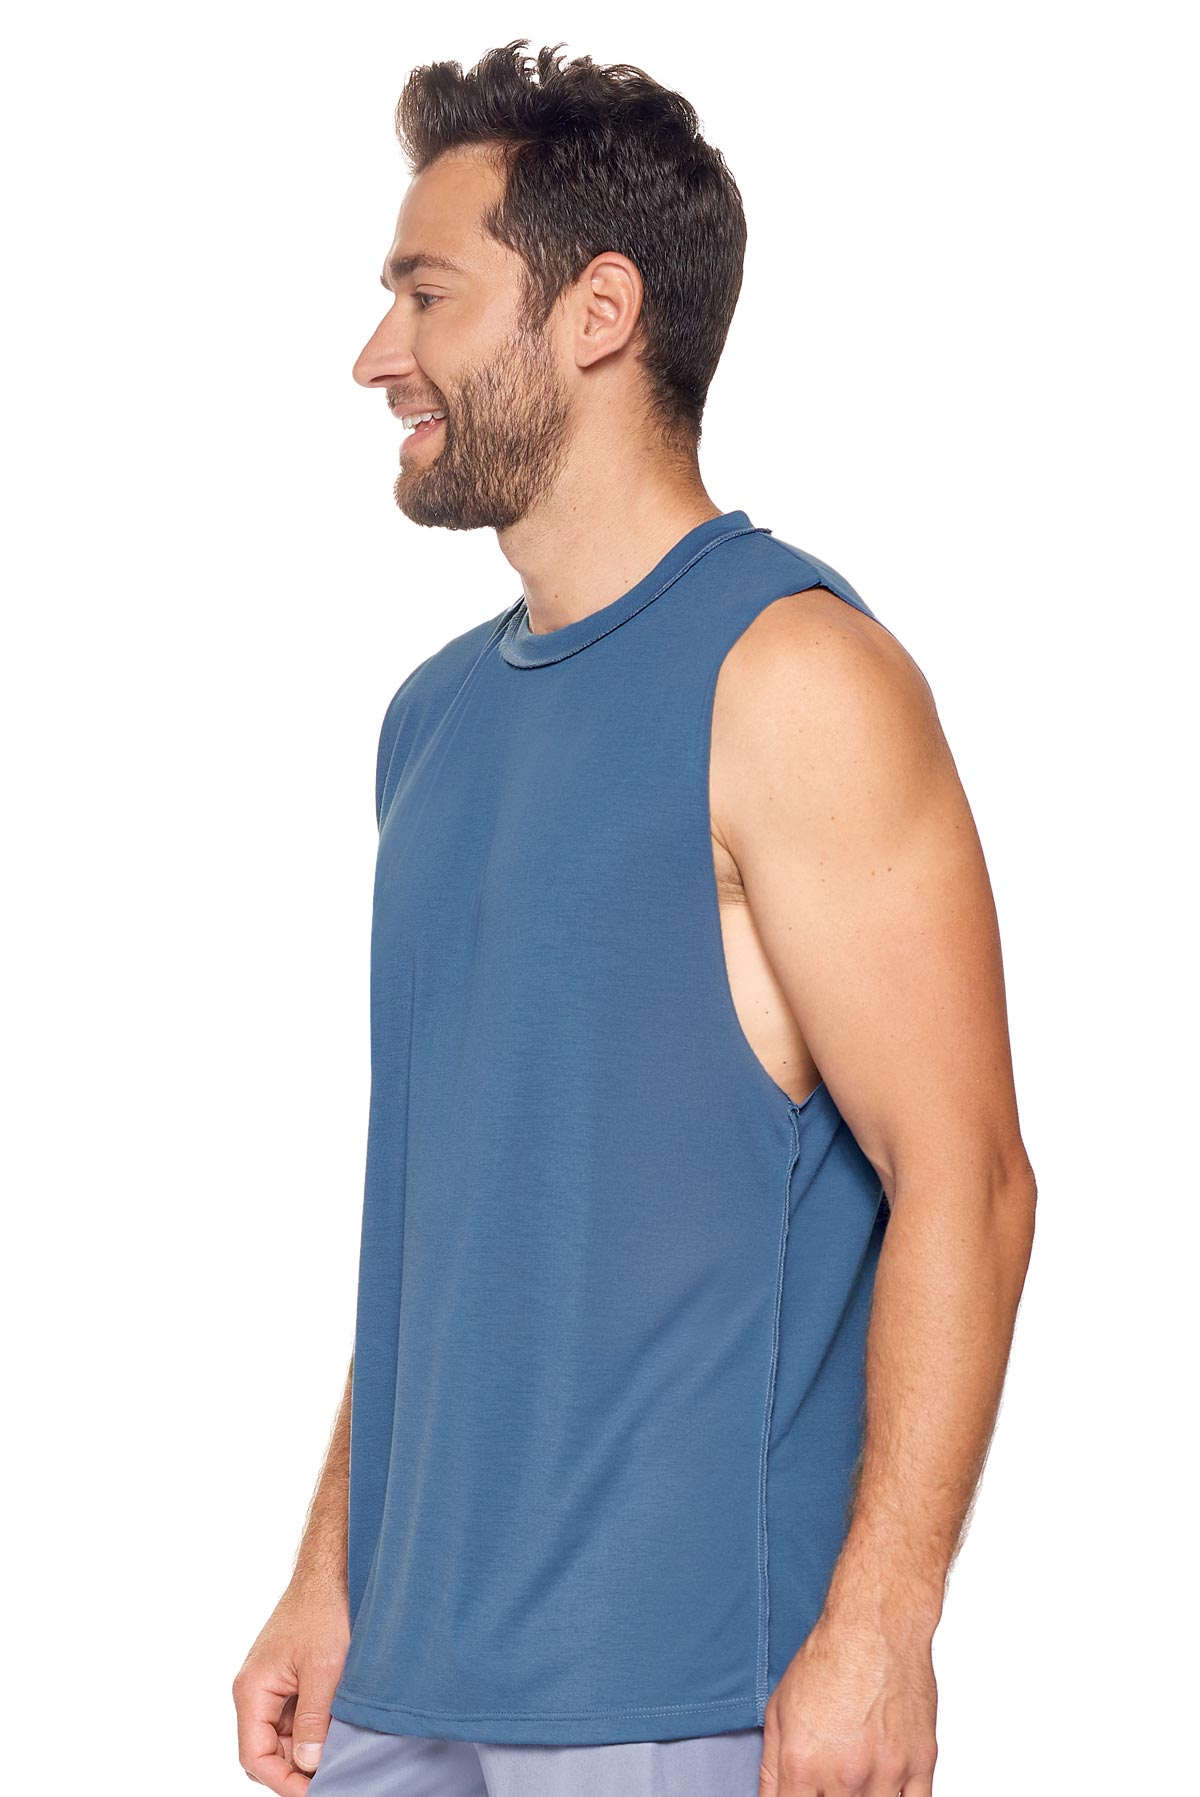 Expert Brand Wholesale BE820 Siro Raw Edge Muscle Tee in Stone Blue Made in USA tee 2 #stone-blue